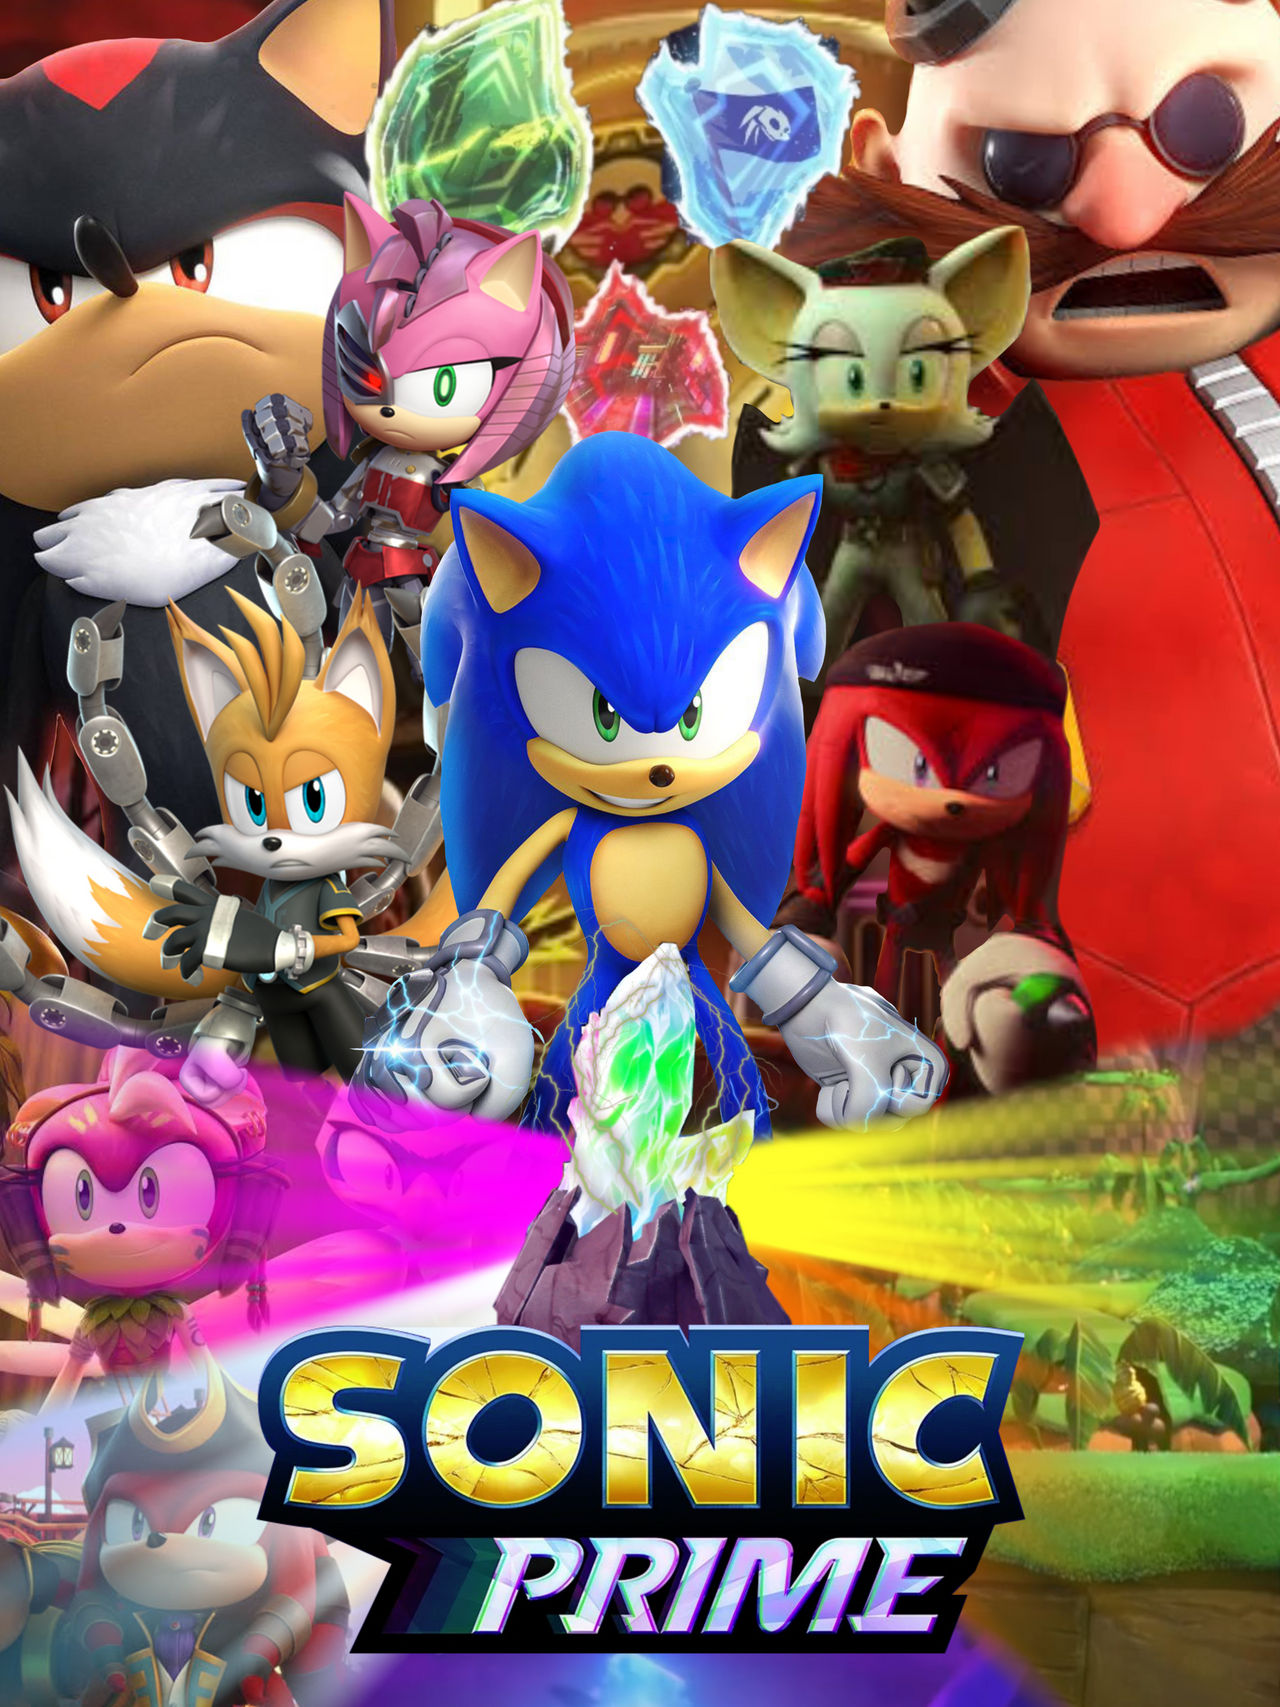 Sonic the Hedgehog (2006) Poster by Acquainted-Guy on DeviantArt